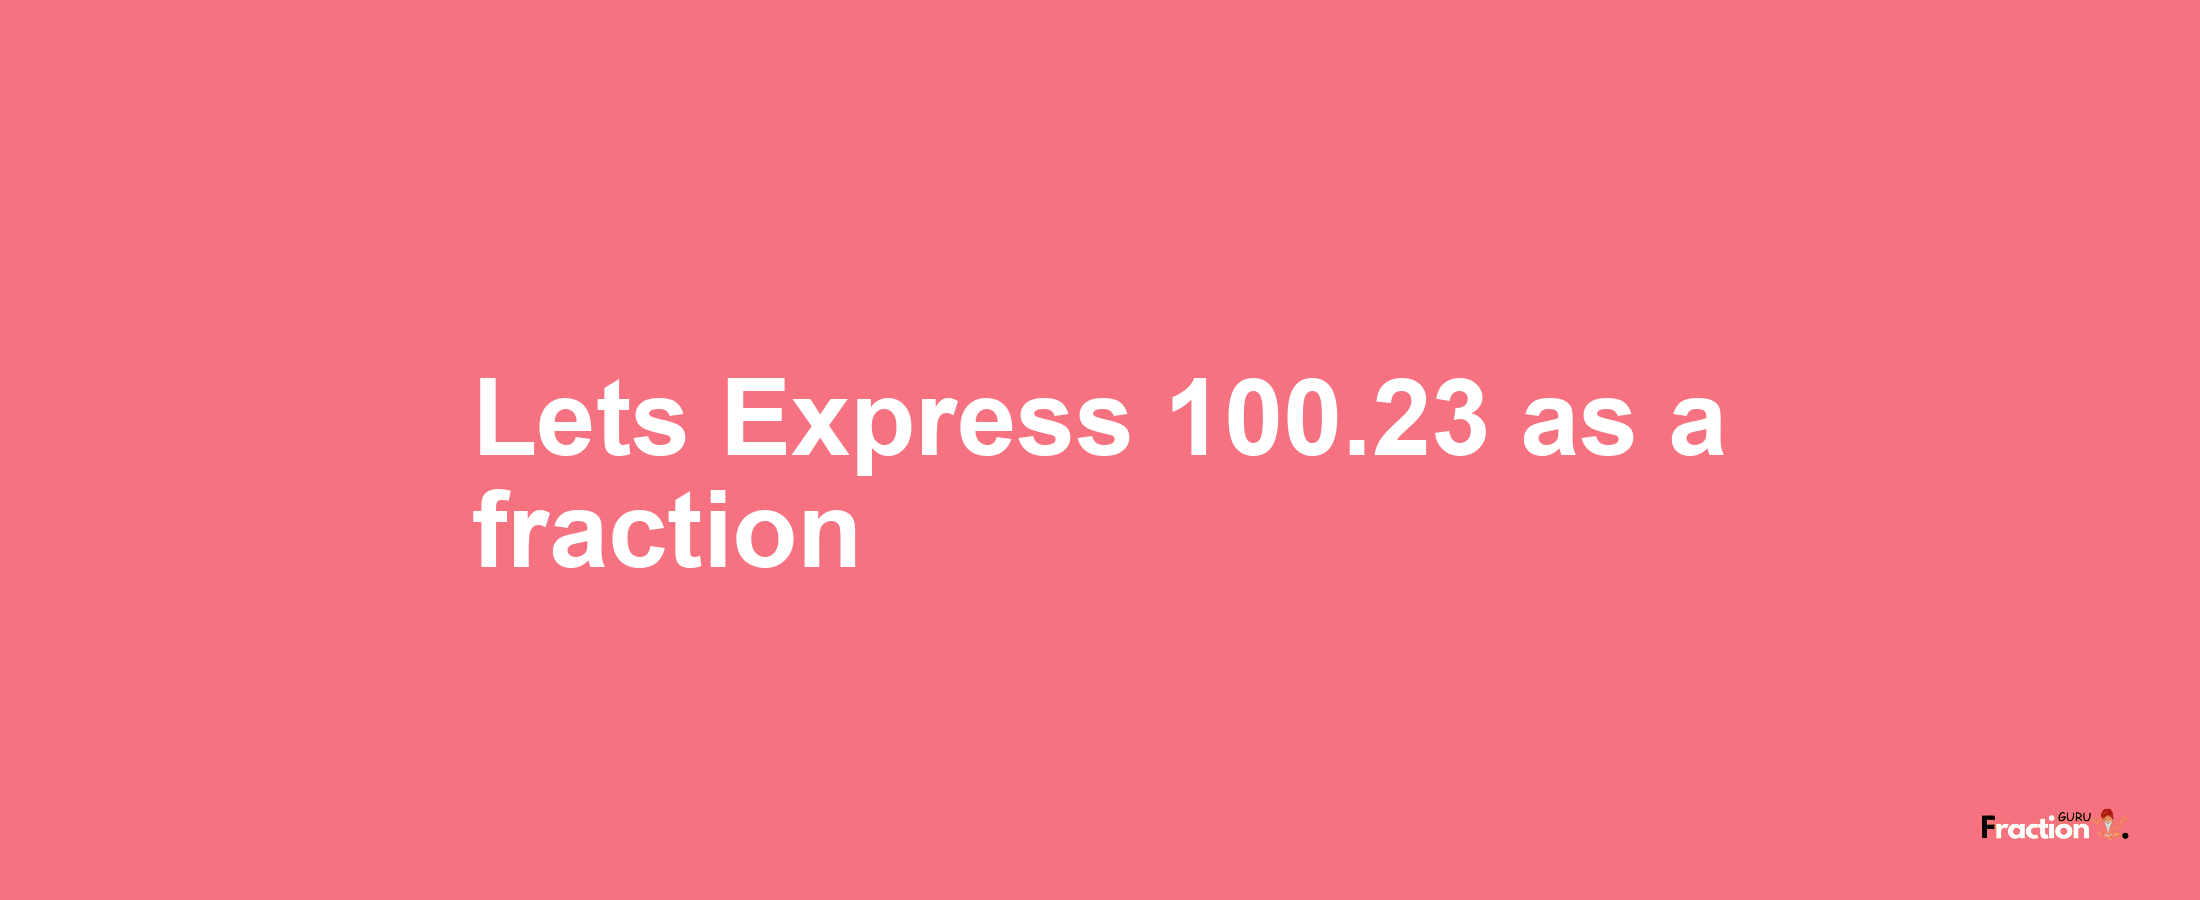 Lets Express 100.23 as afraction